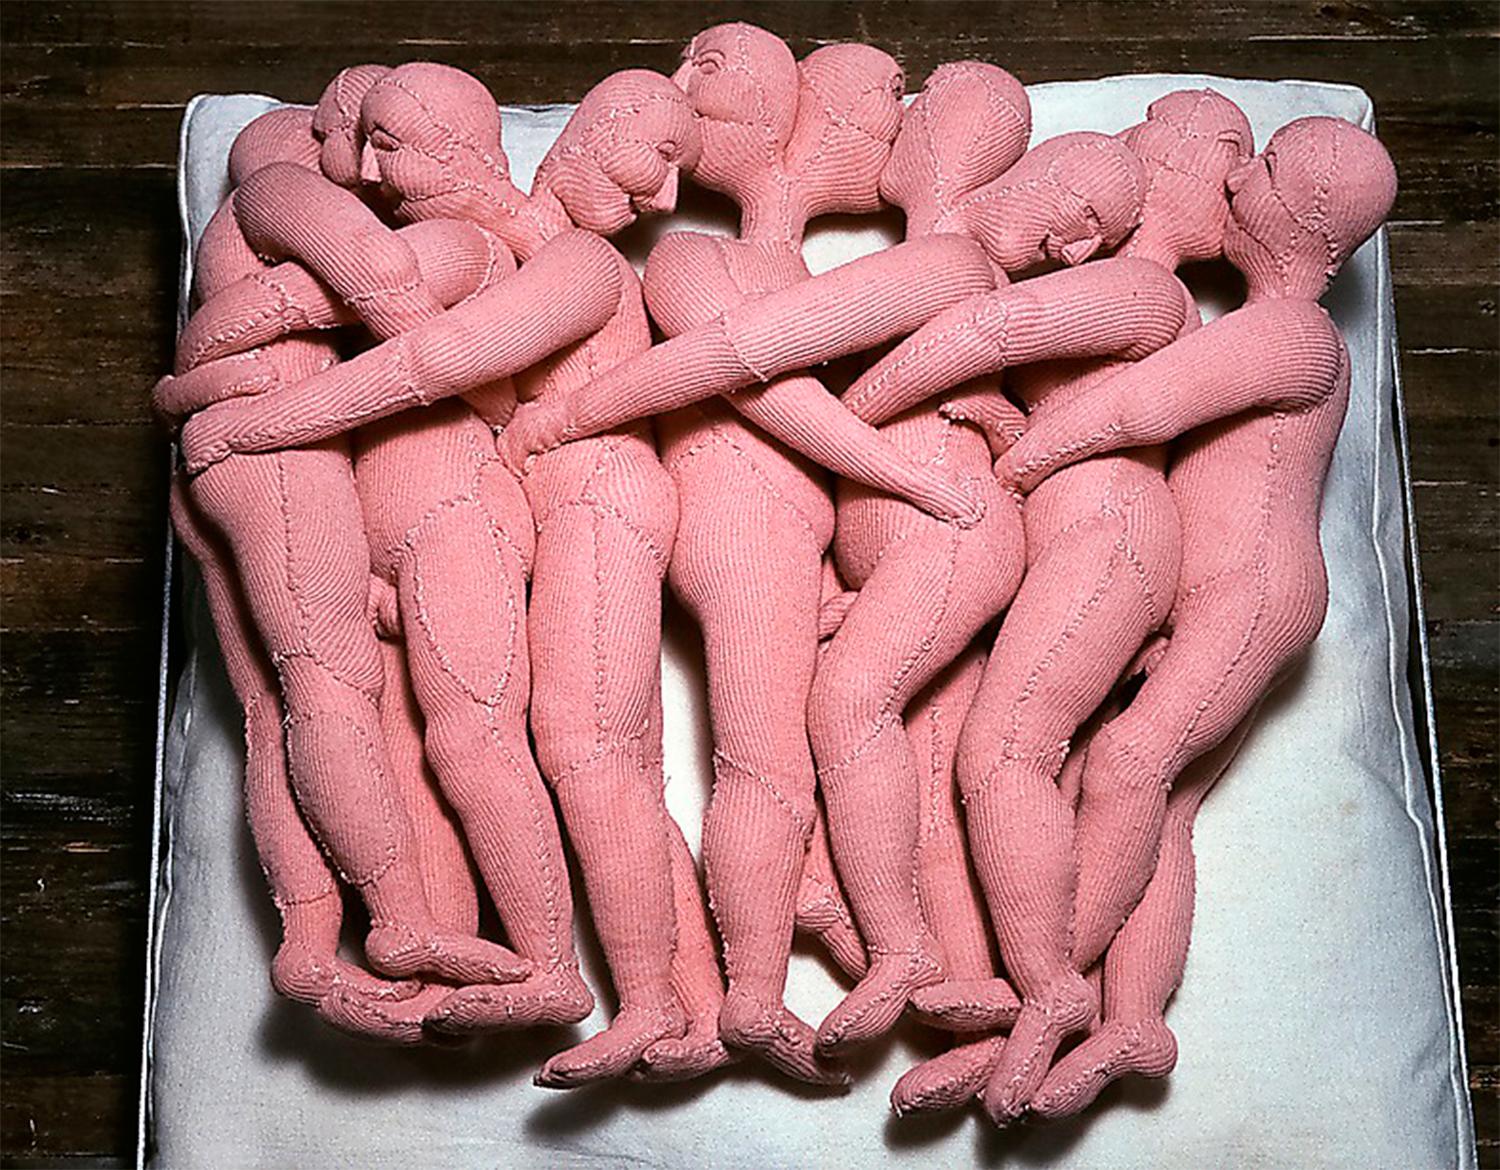 Louise Bourgeois, ”Seven in bed”, 2001. © The Easton Foundation Foto: Christopher Burke